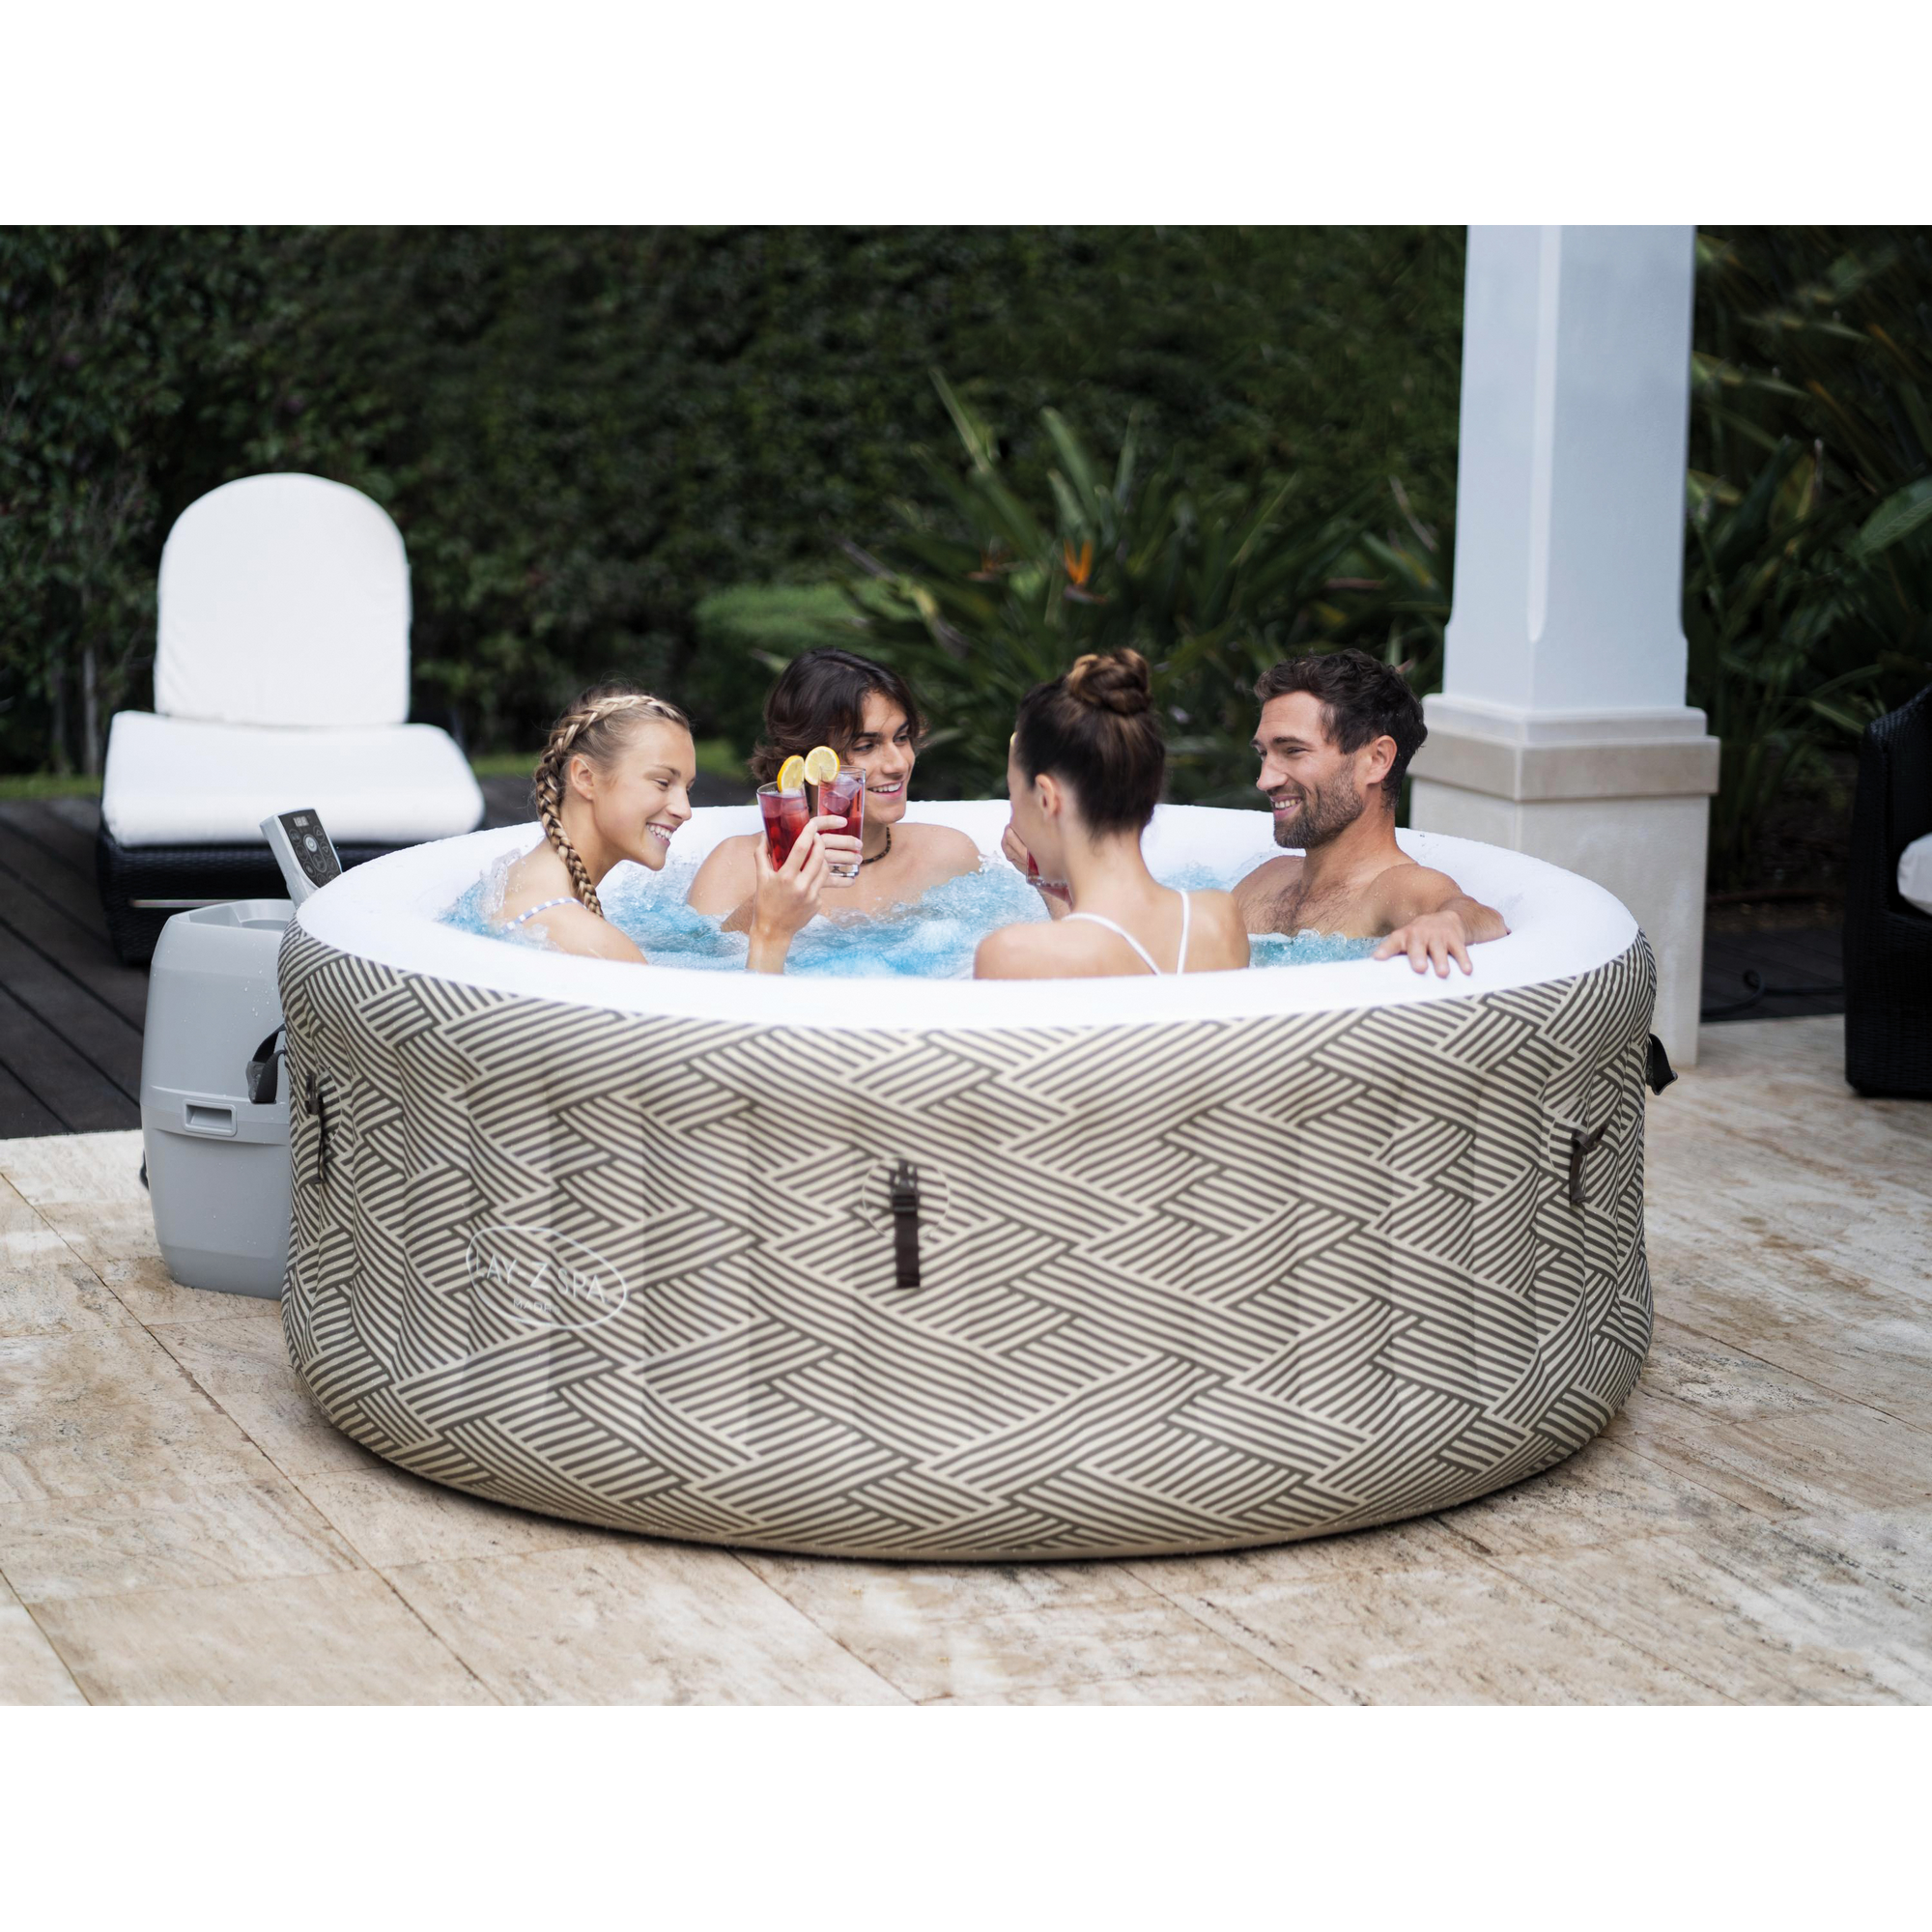 WLAN-Whirlpool 'LAY-Z-SPA Madrid AirJet' Ø 180 x 66 cm beige + product picture